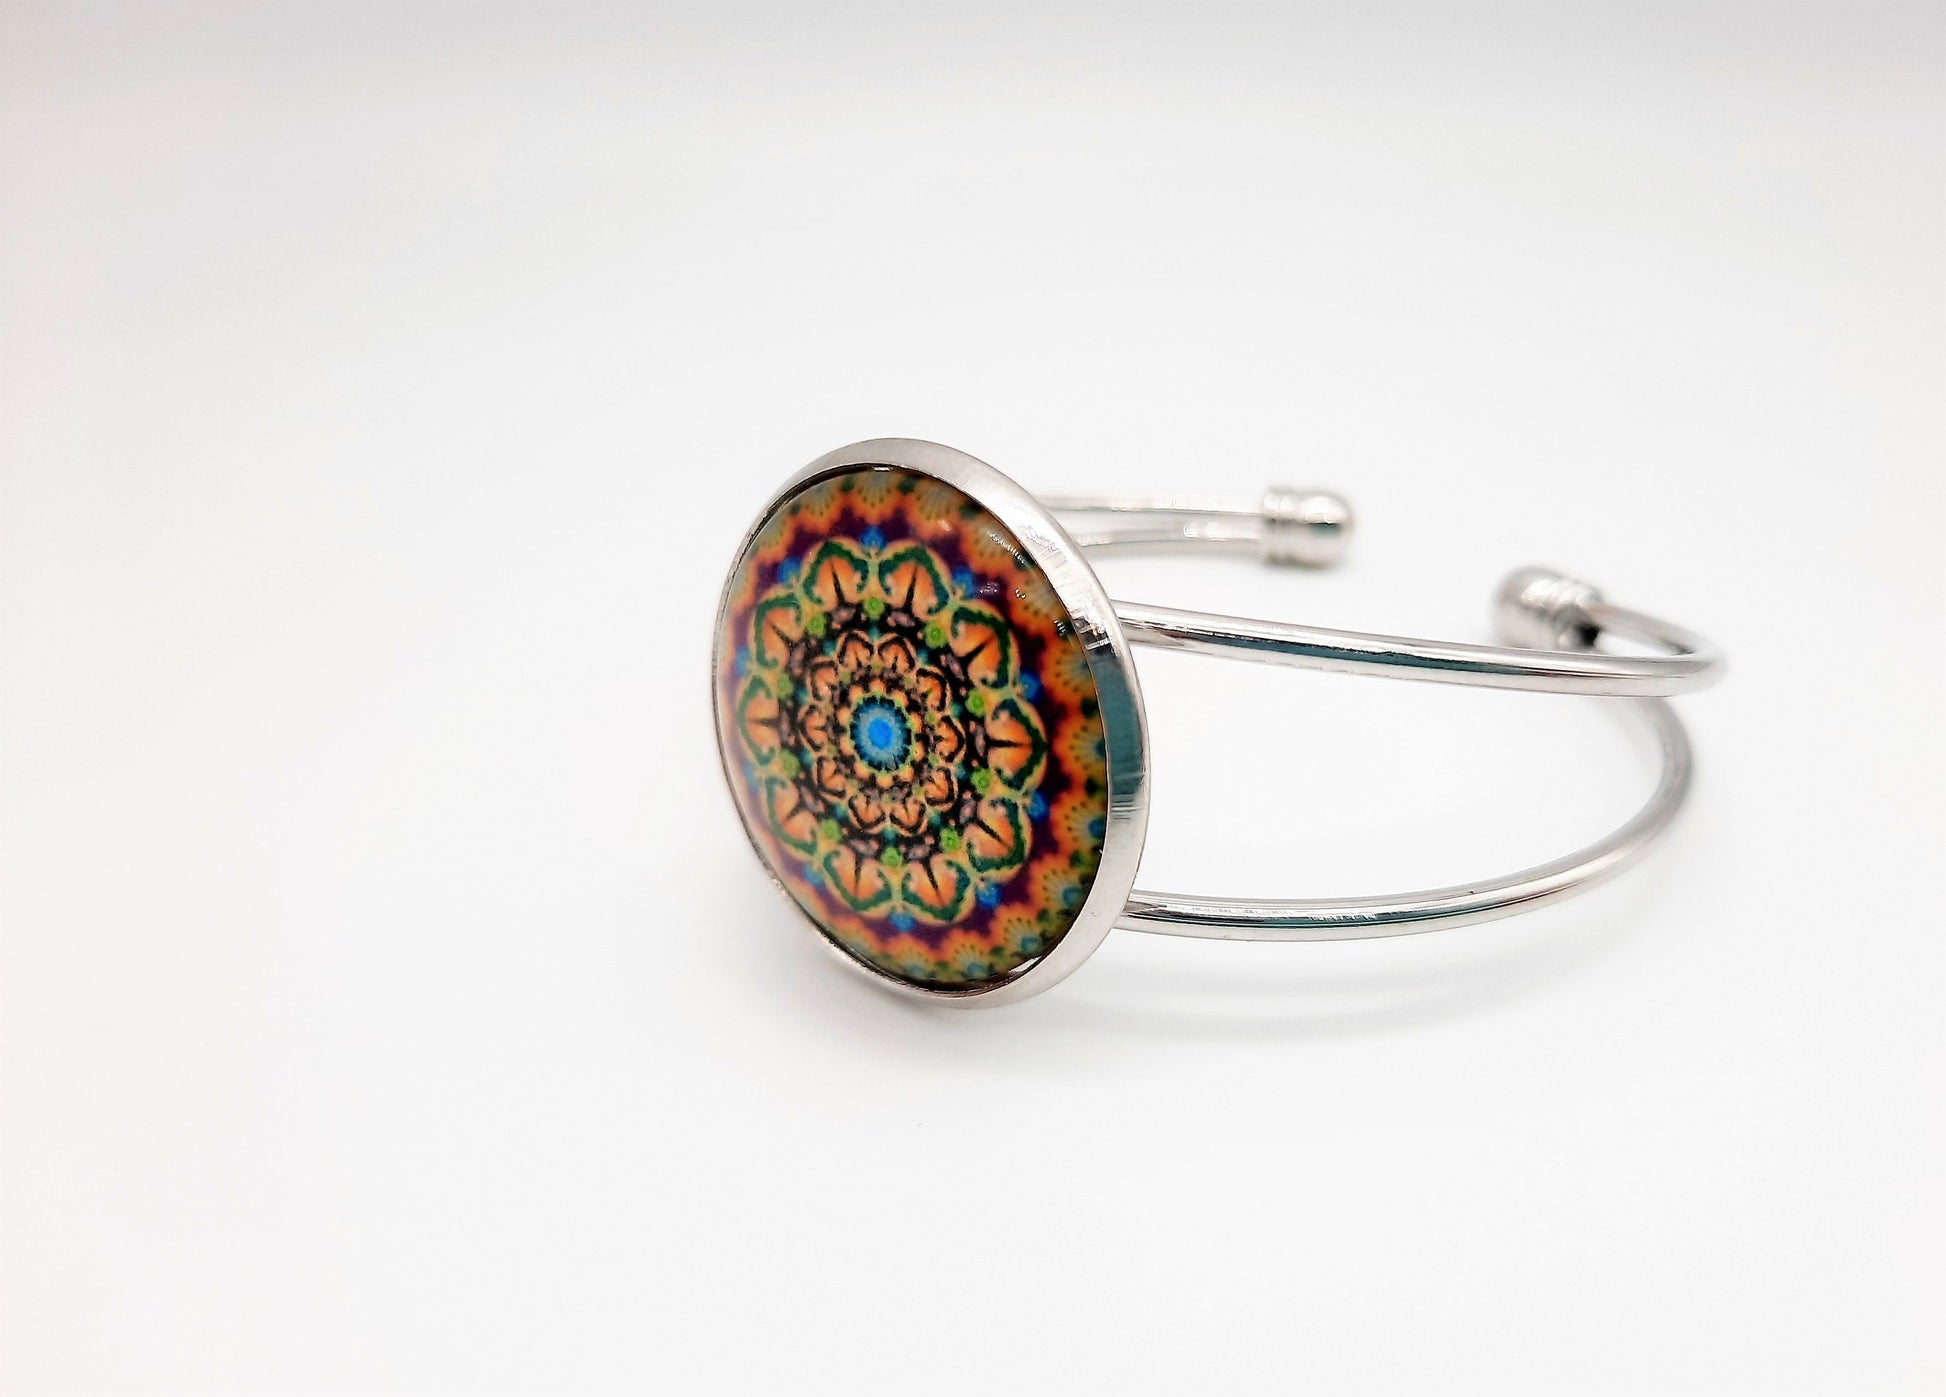 Mandala Pattern Design - Glass Cabochon Stainless Steel Adjustable Bangle Cuff Bracelet - Made with Hypoallergenic Stainless Steel